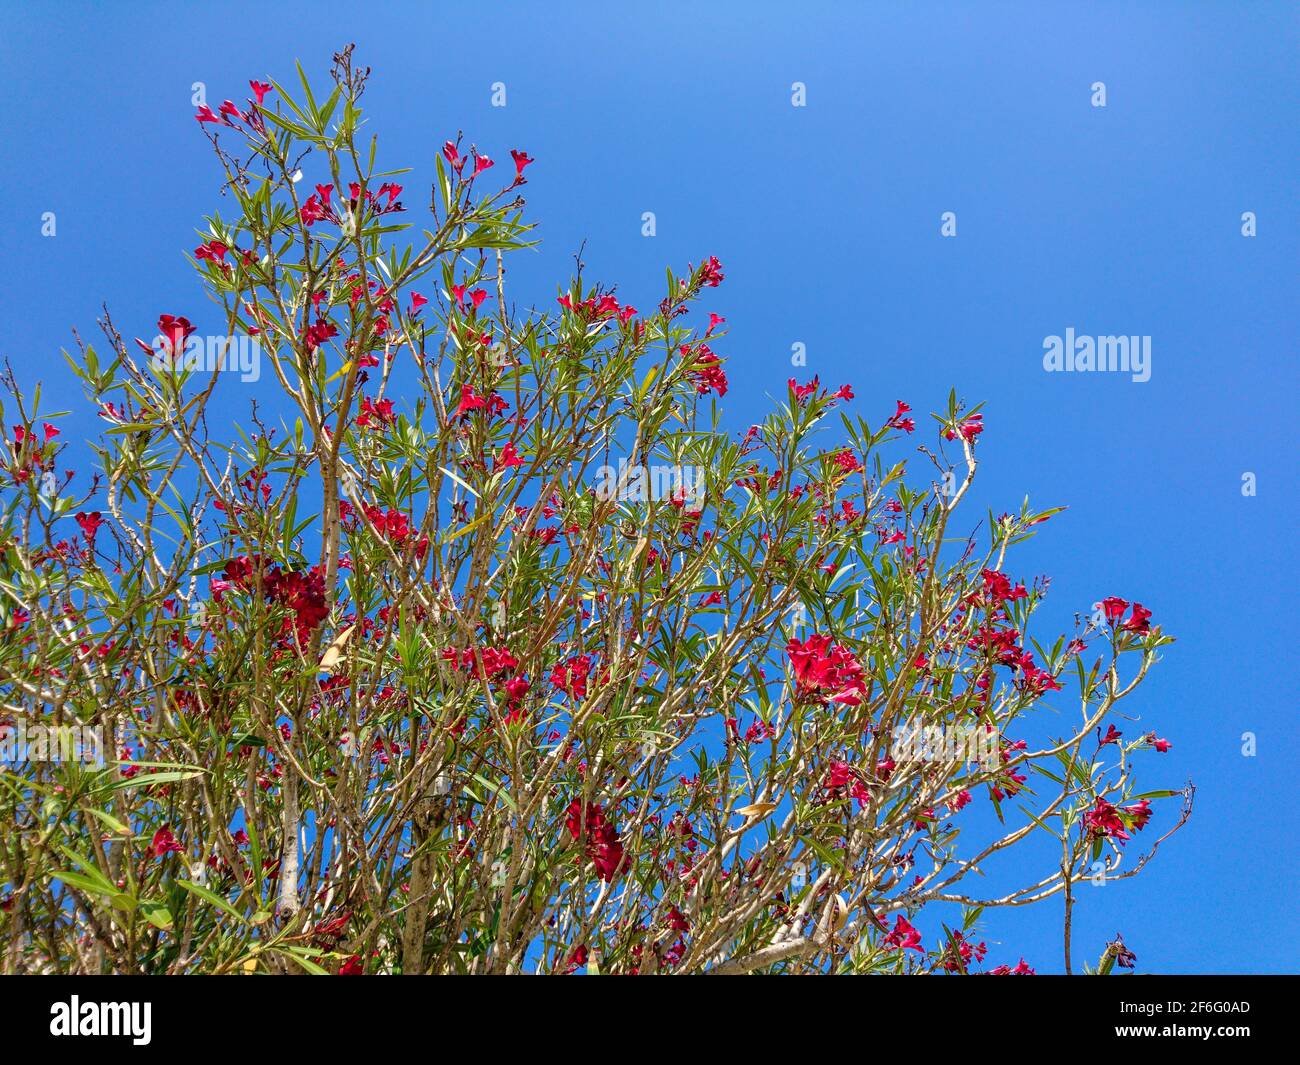 Red Nerium oleander shrub (small tree) on bright blue sky background. Subfamily Apocynoideae of the dogbane family Apocynaceae, landscaping plant Stock Photo